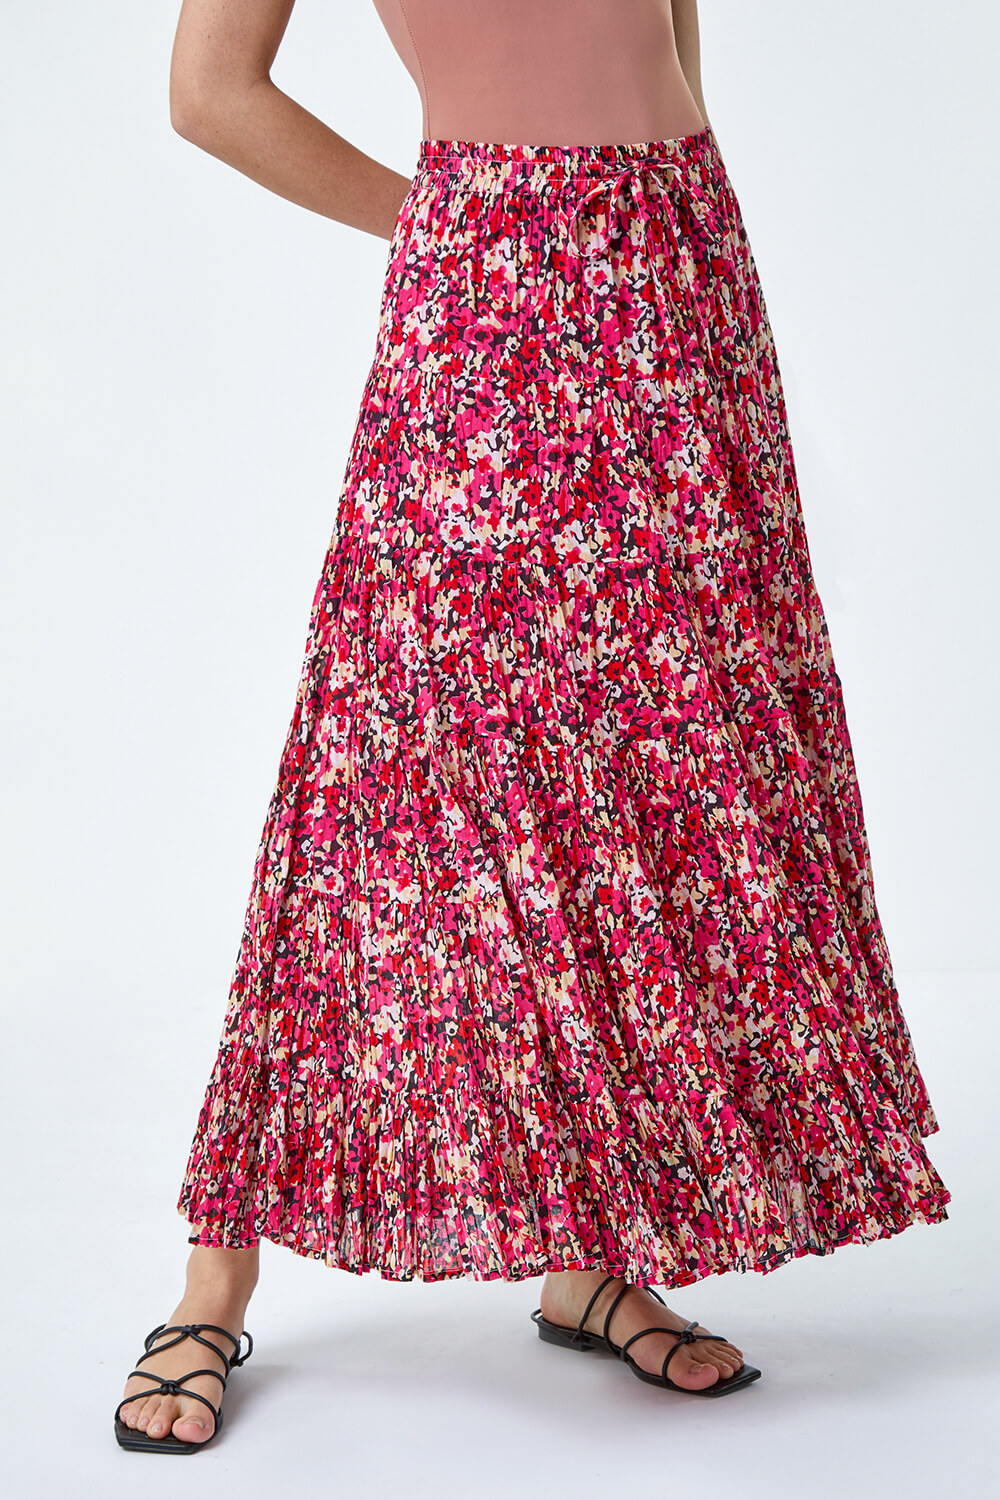 PINK Floral Crinkle Cotton A line Tiered Maxi Skirt, Image 4 of 5